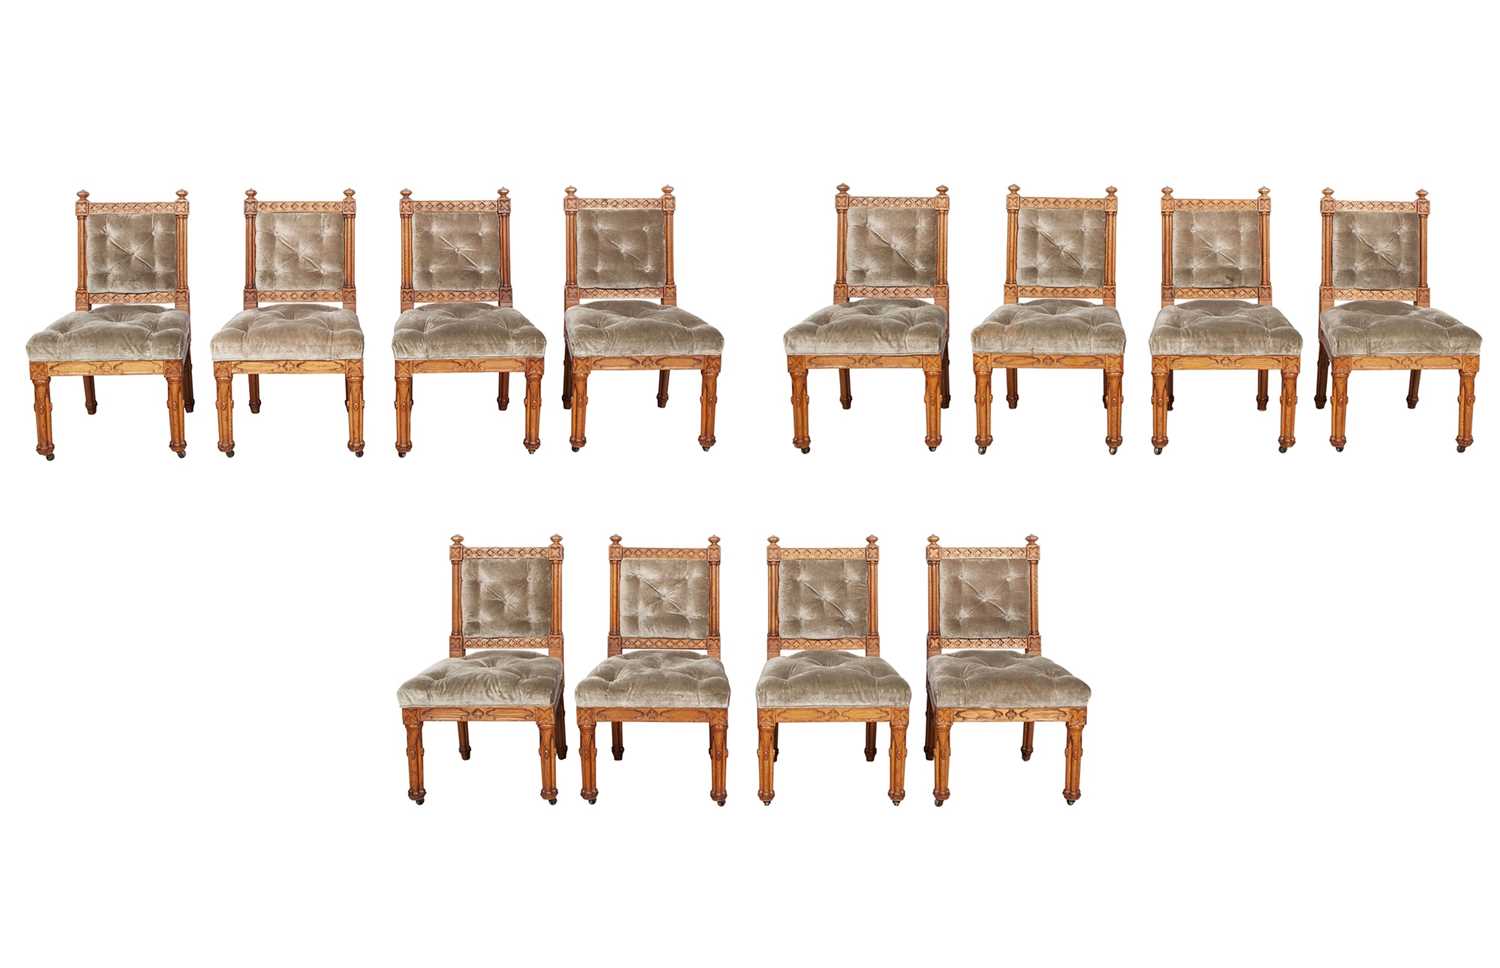 Lot 151 - Important Set of Twelve Geoge IV Gothic Revival Oak Dining Chairs from Knowsley Hall, Lancashire